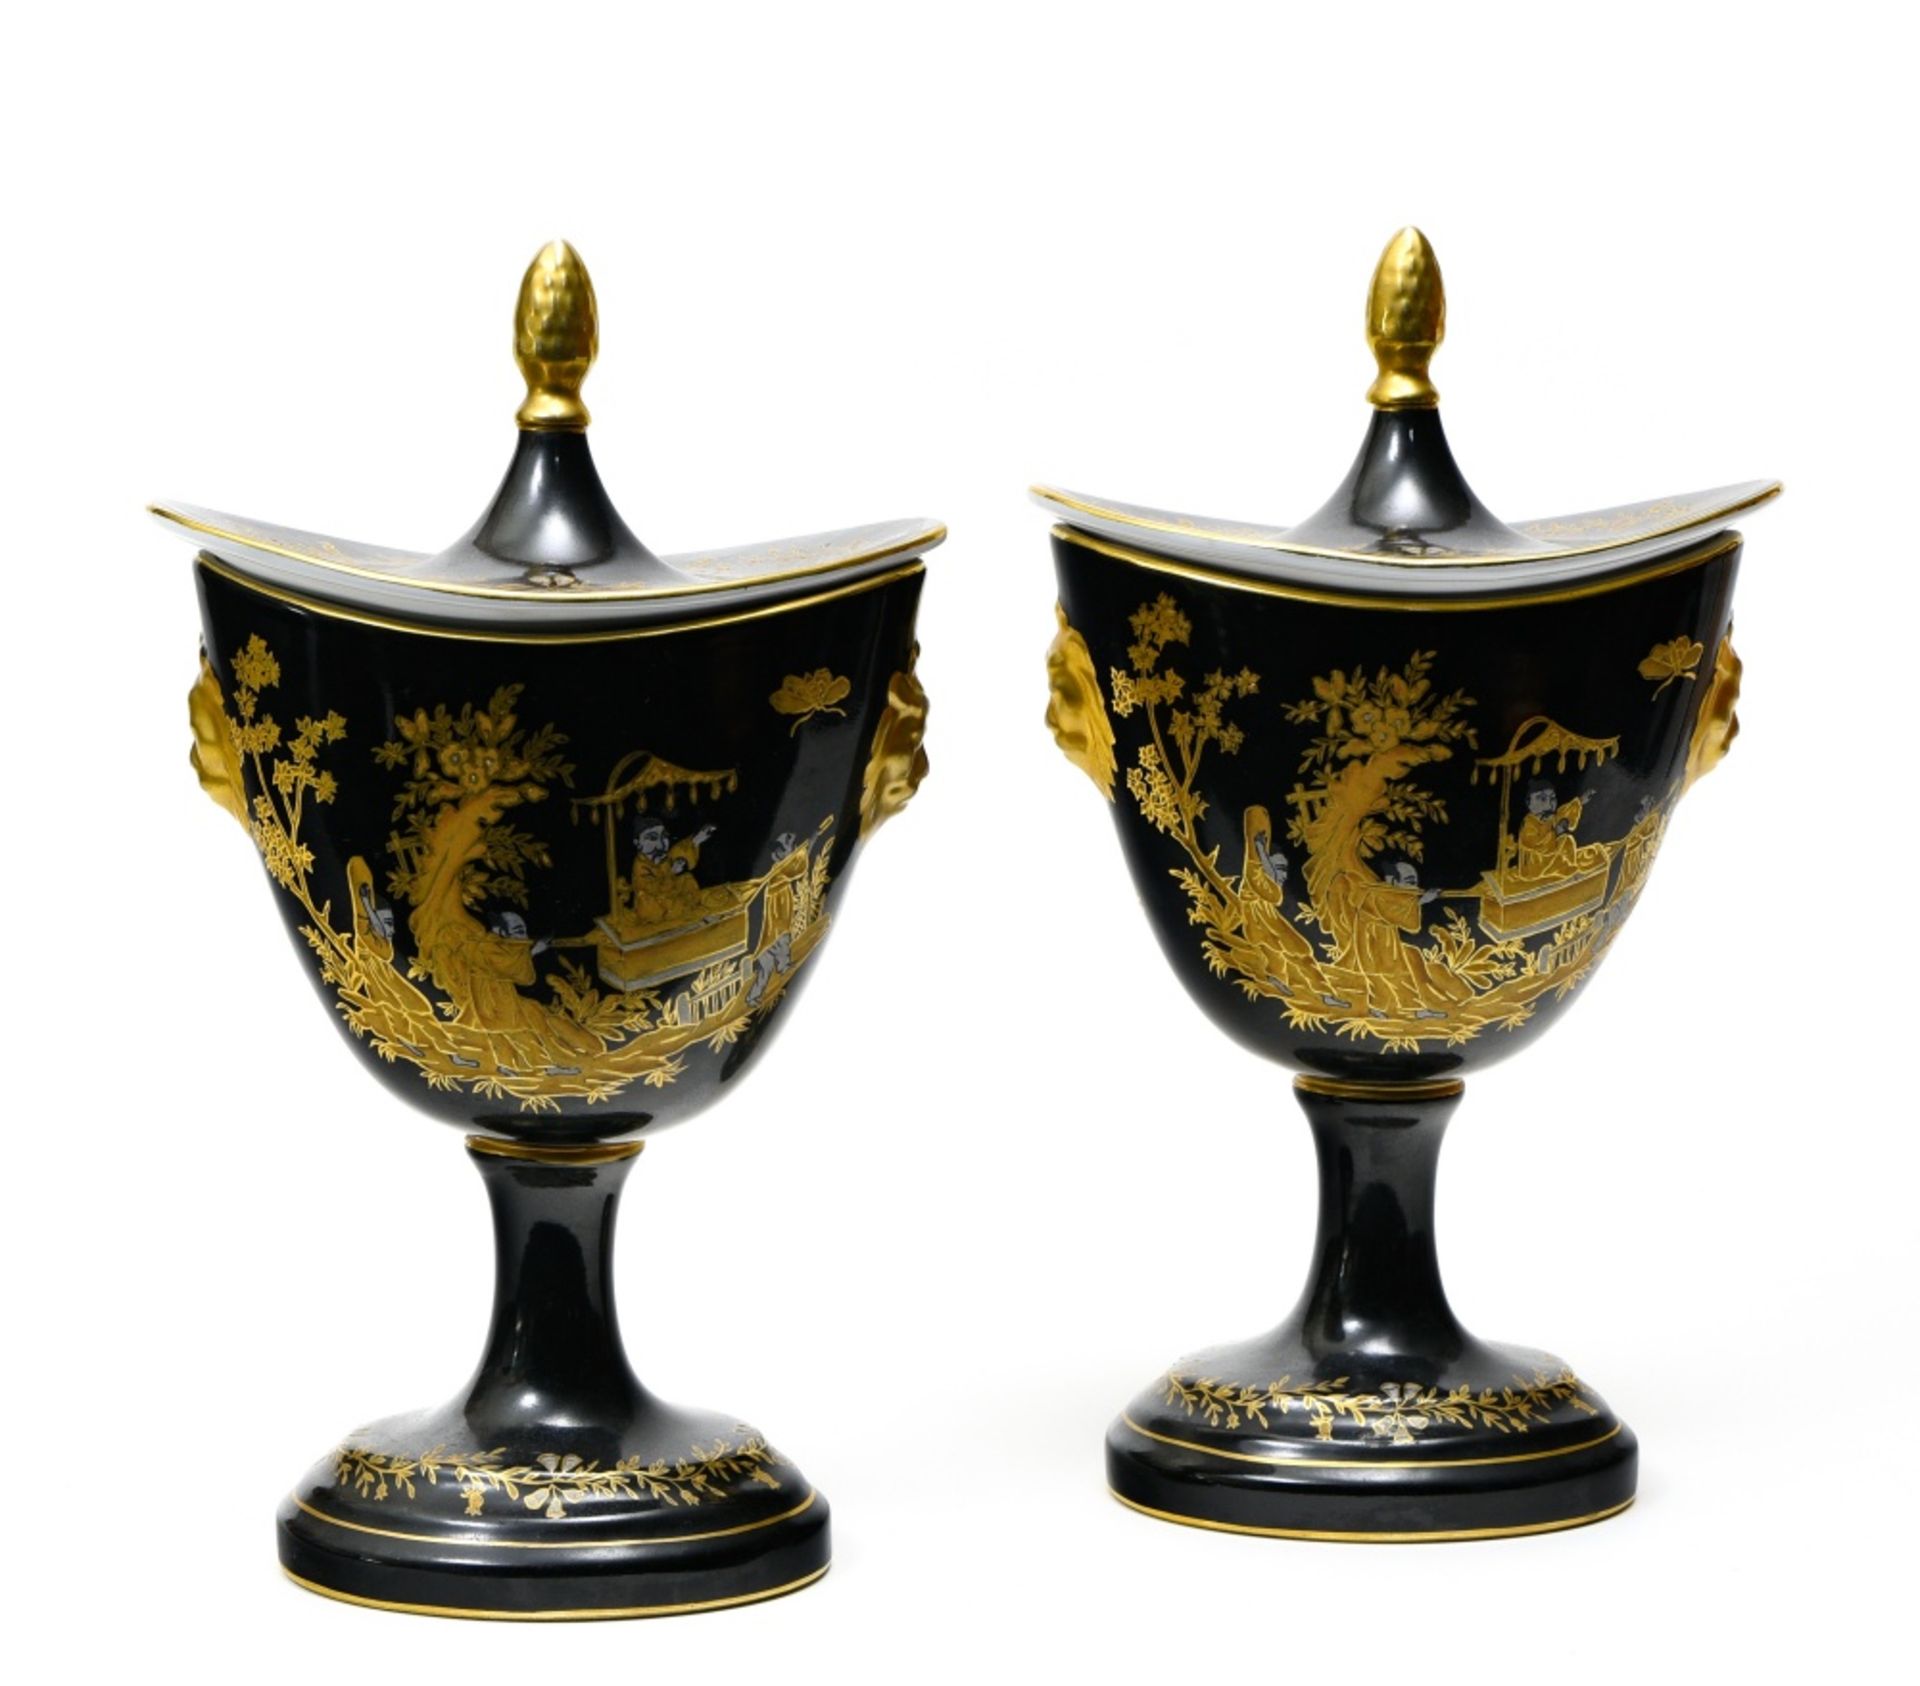 Late 19th-early 20th century work Pair of navette-shaped covered pots, Black and gold enamelled - Image 2 of 2